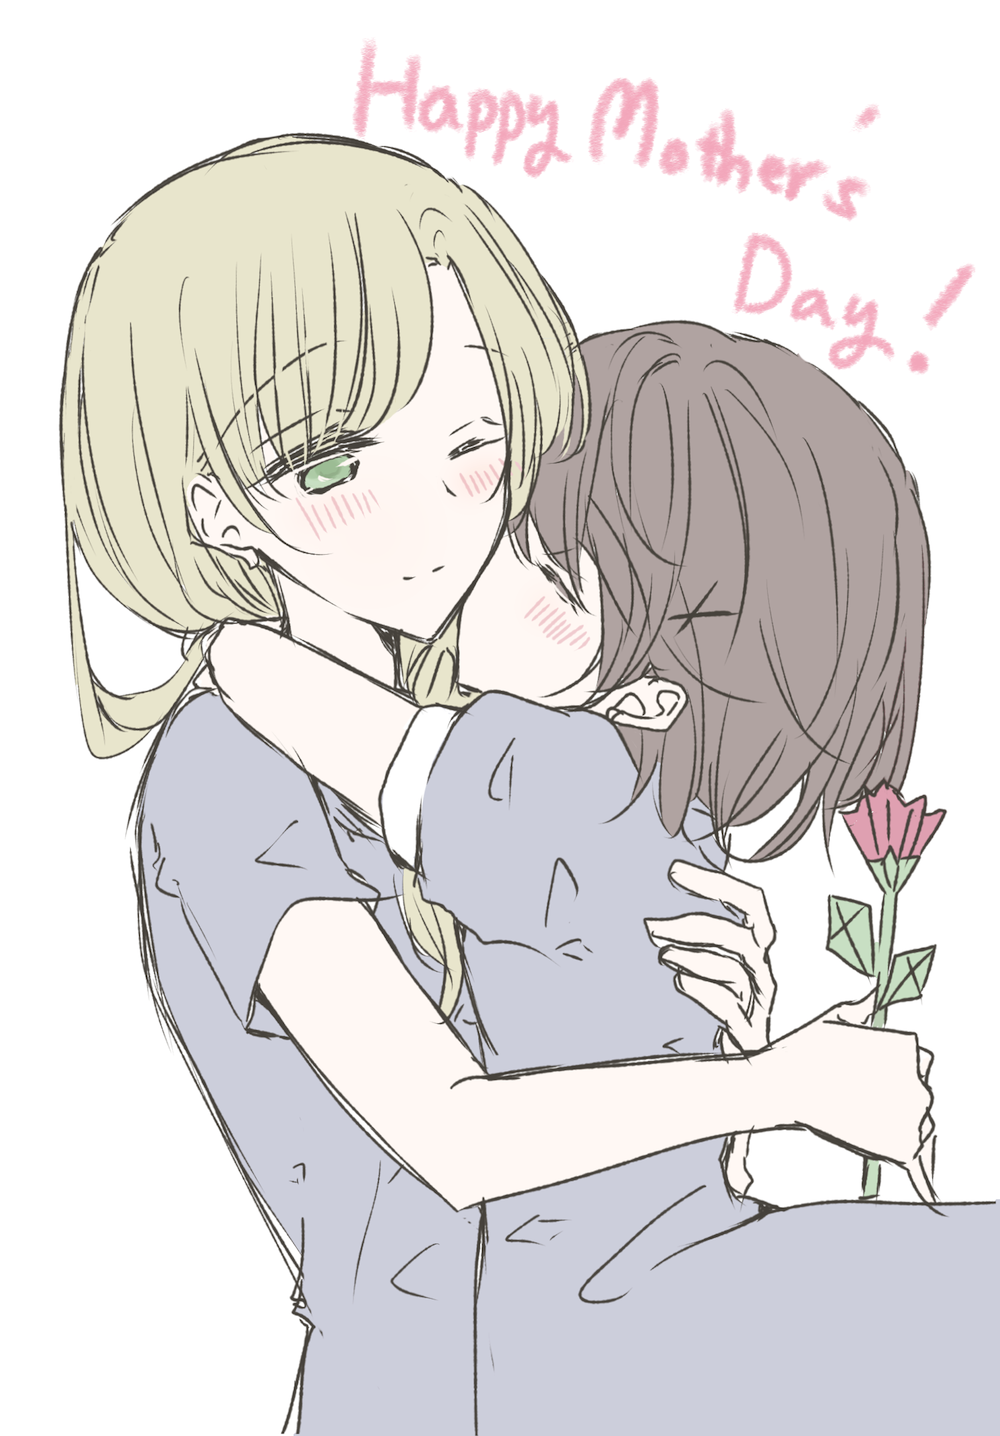 1_x_1/2 2girls 66ta1yak1 blonde_hair blush brown_hair commentary_request dress english_text eyebrows_visible_through_hair flower green_eyes highres holding holding_flower hug kiss long_hair morii_asuka morii_ayako mother's_day mother_and_daughter multiple_girls one_eye_closed simple_background smile white_background